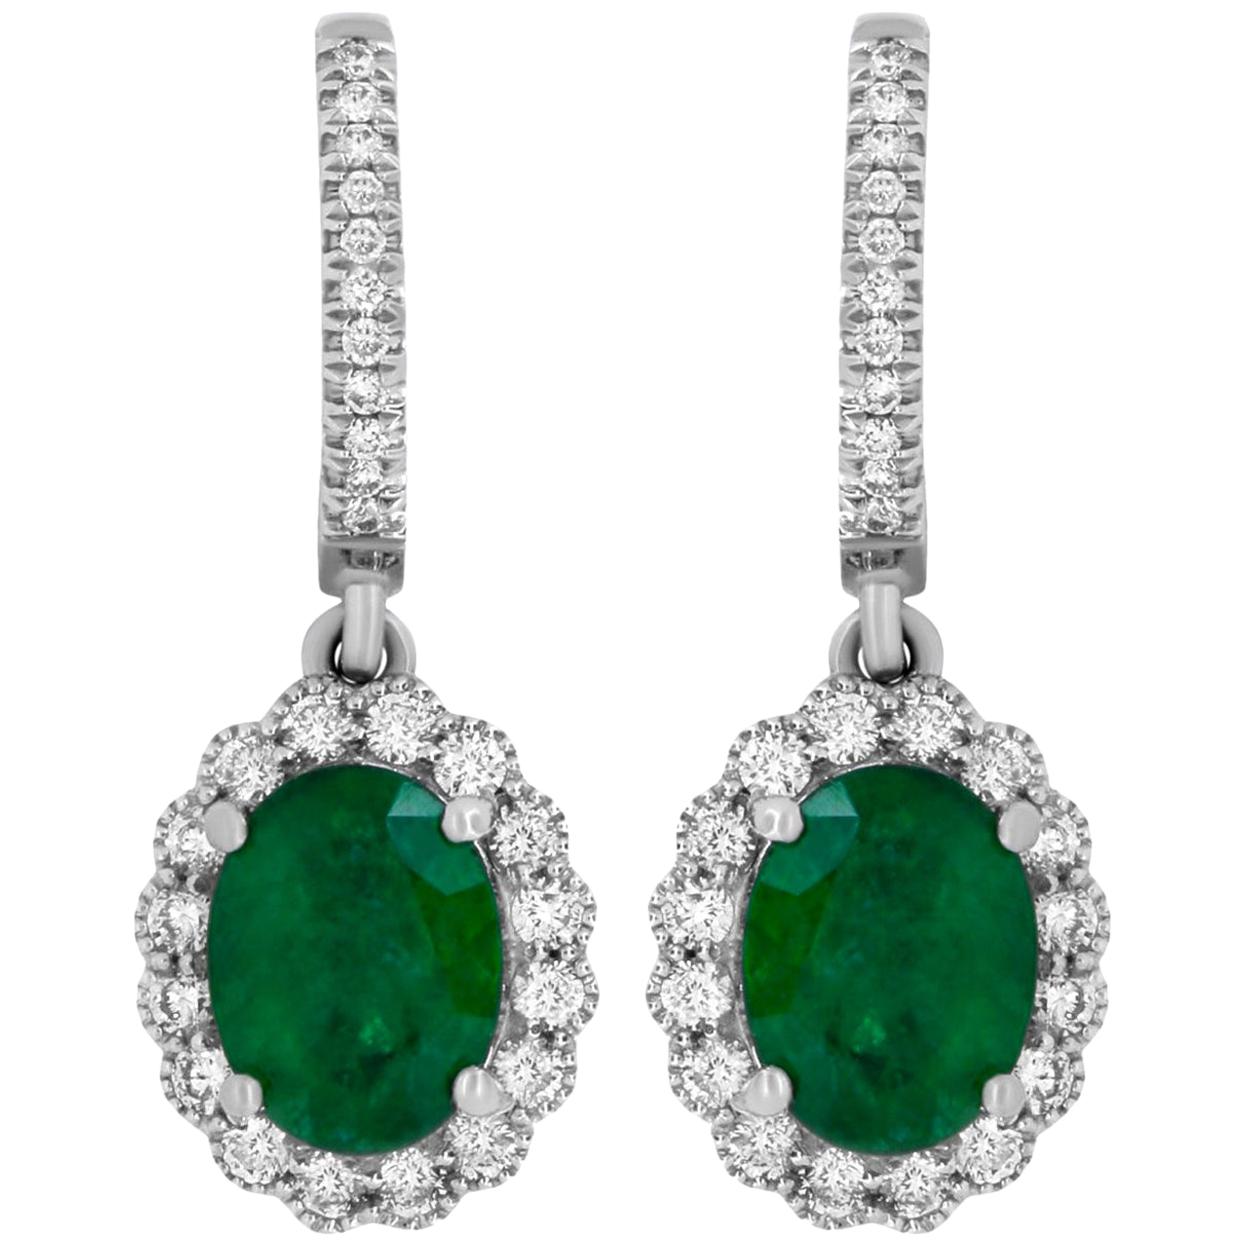 Double Oval Shaped Emerald Earrings with Halo Diamonds Made in 14k ...